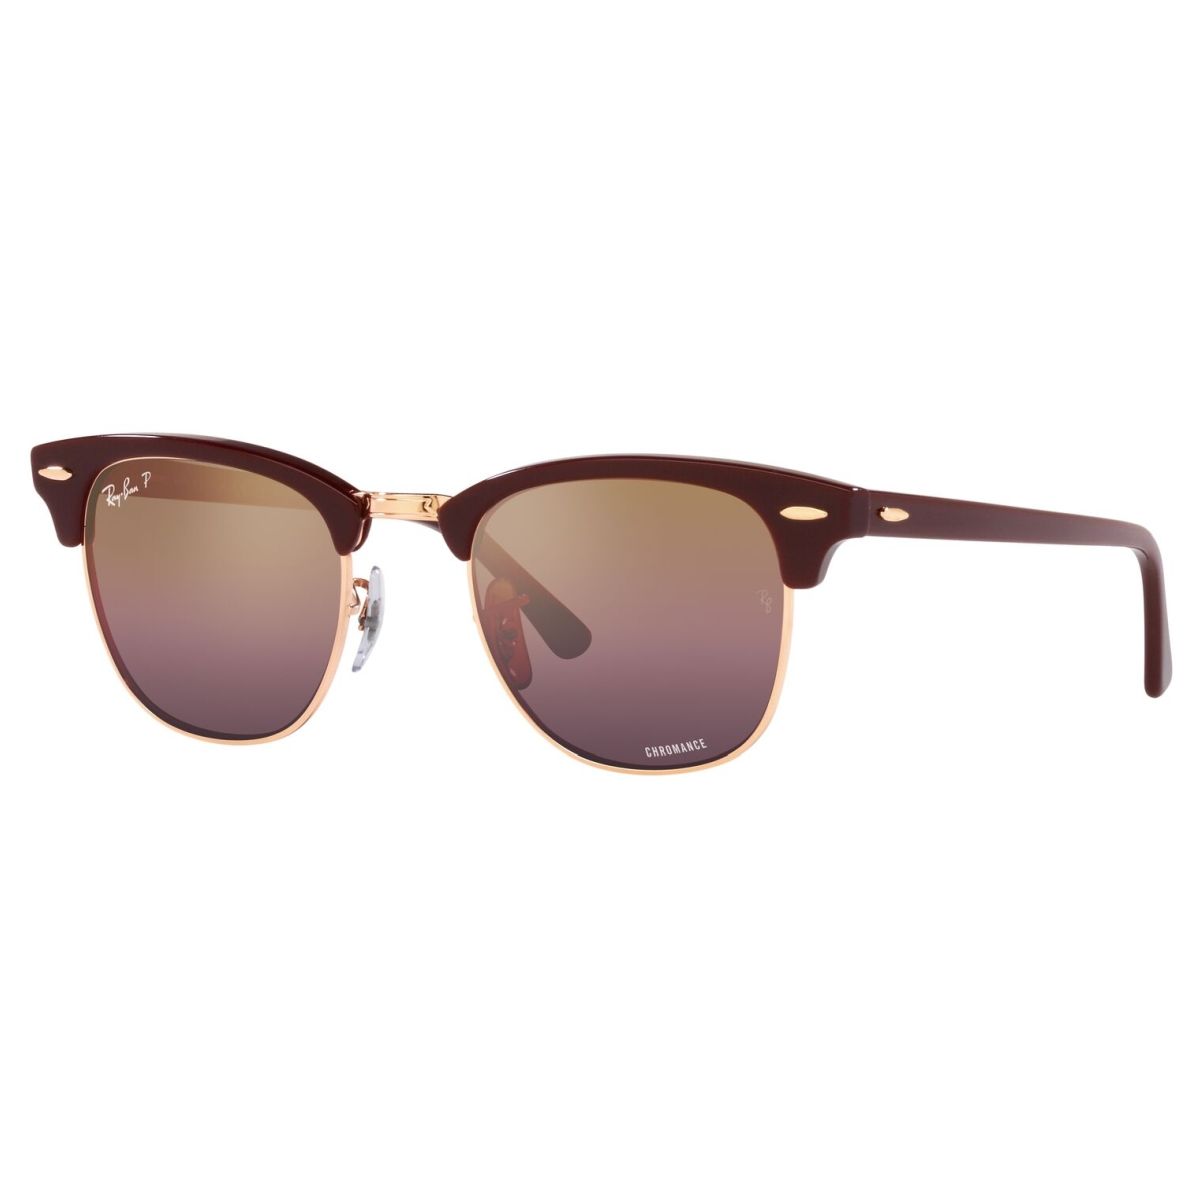 RAY-BAN CLUBMASTER 3016/1365G9